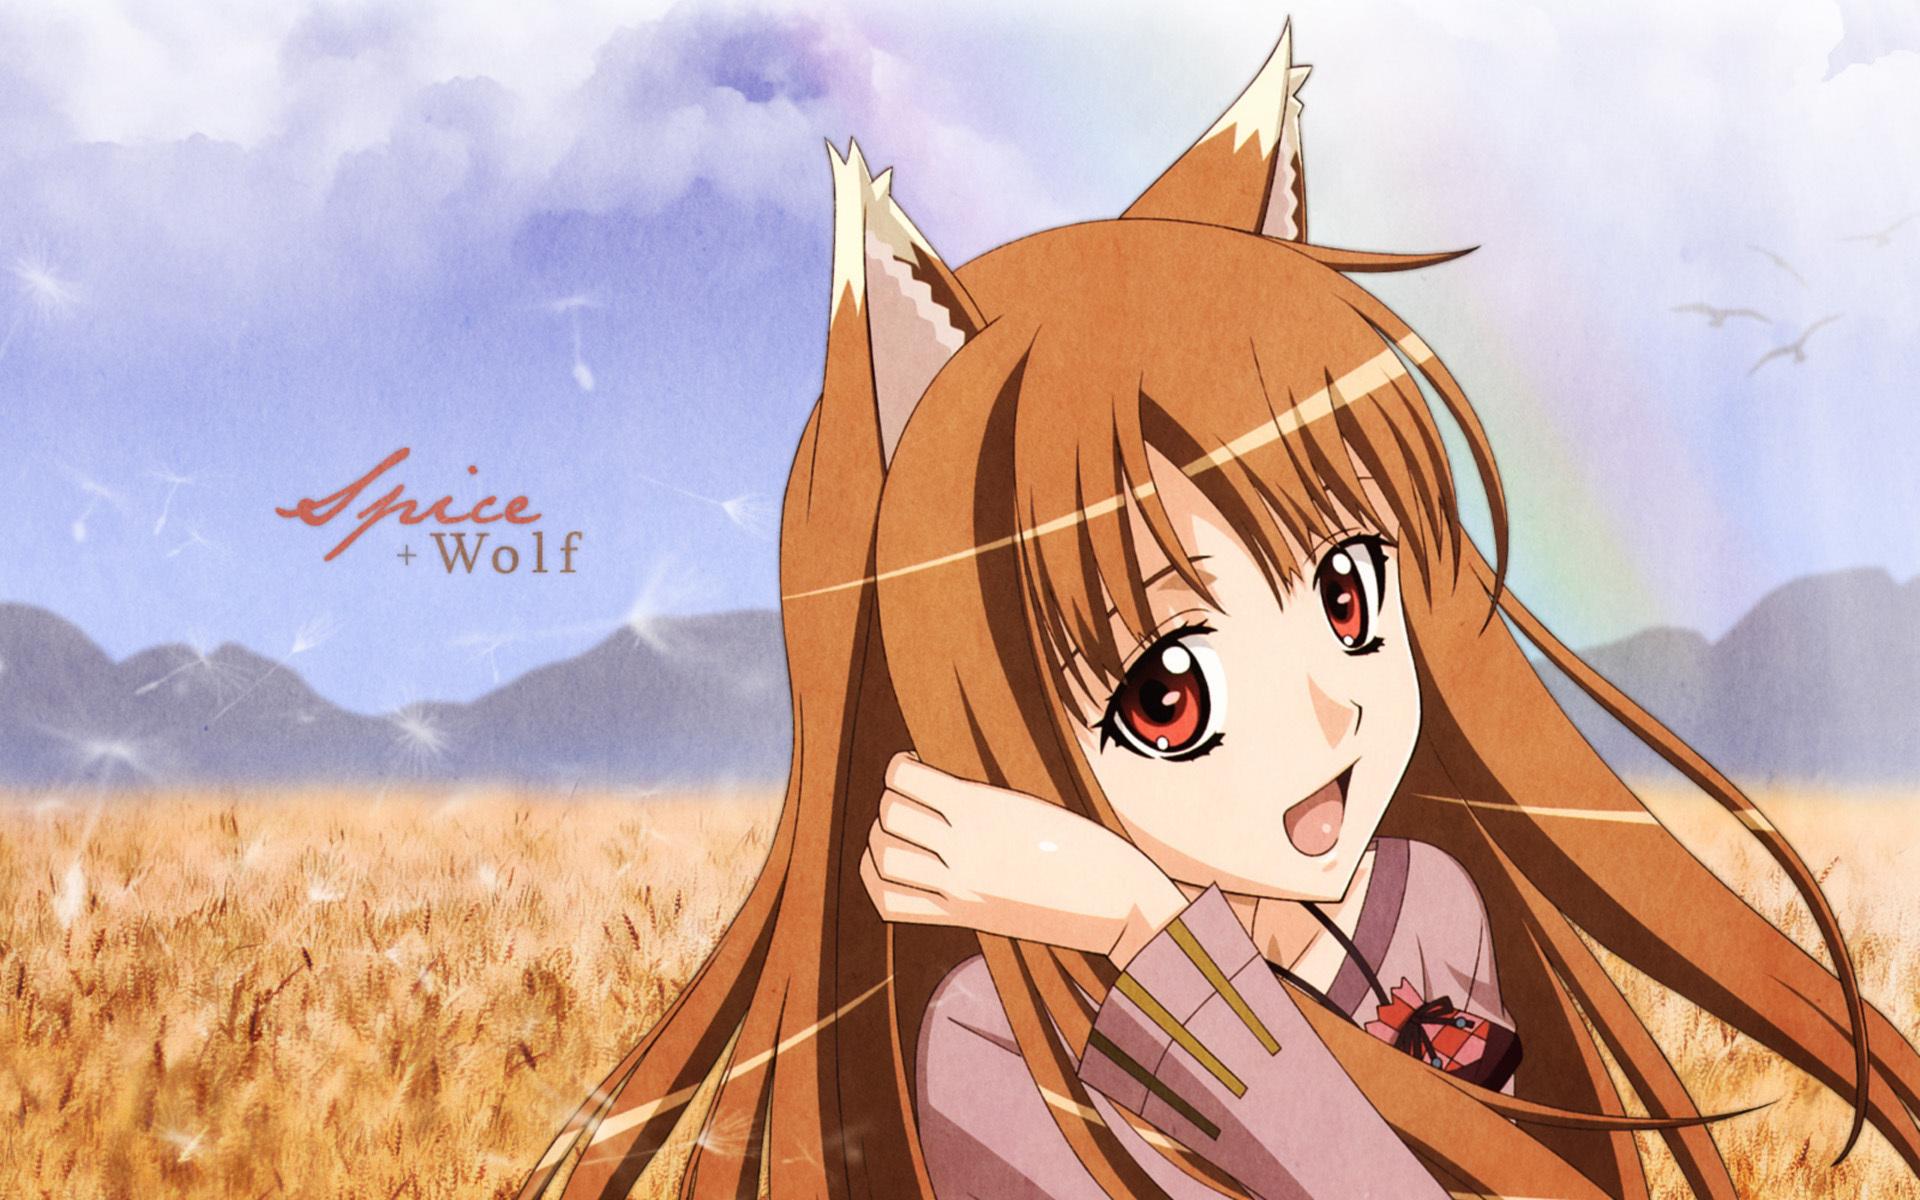 1920x1200px Spice And Wolf 656.64 KB